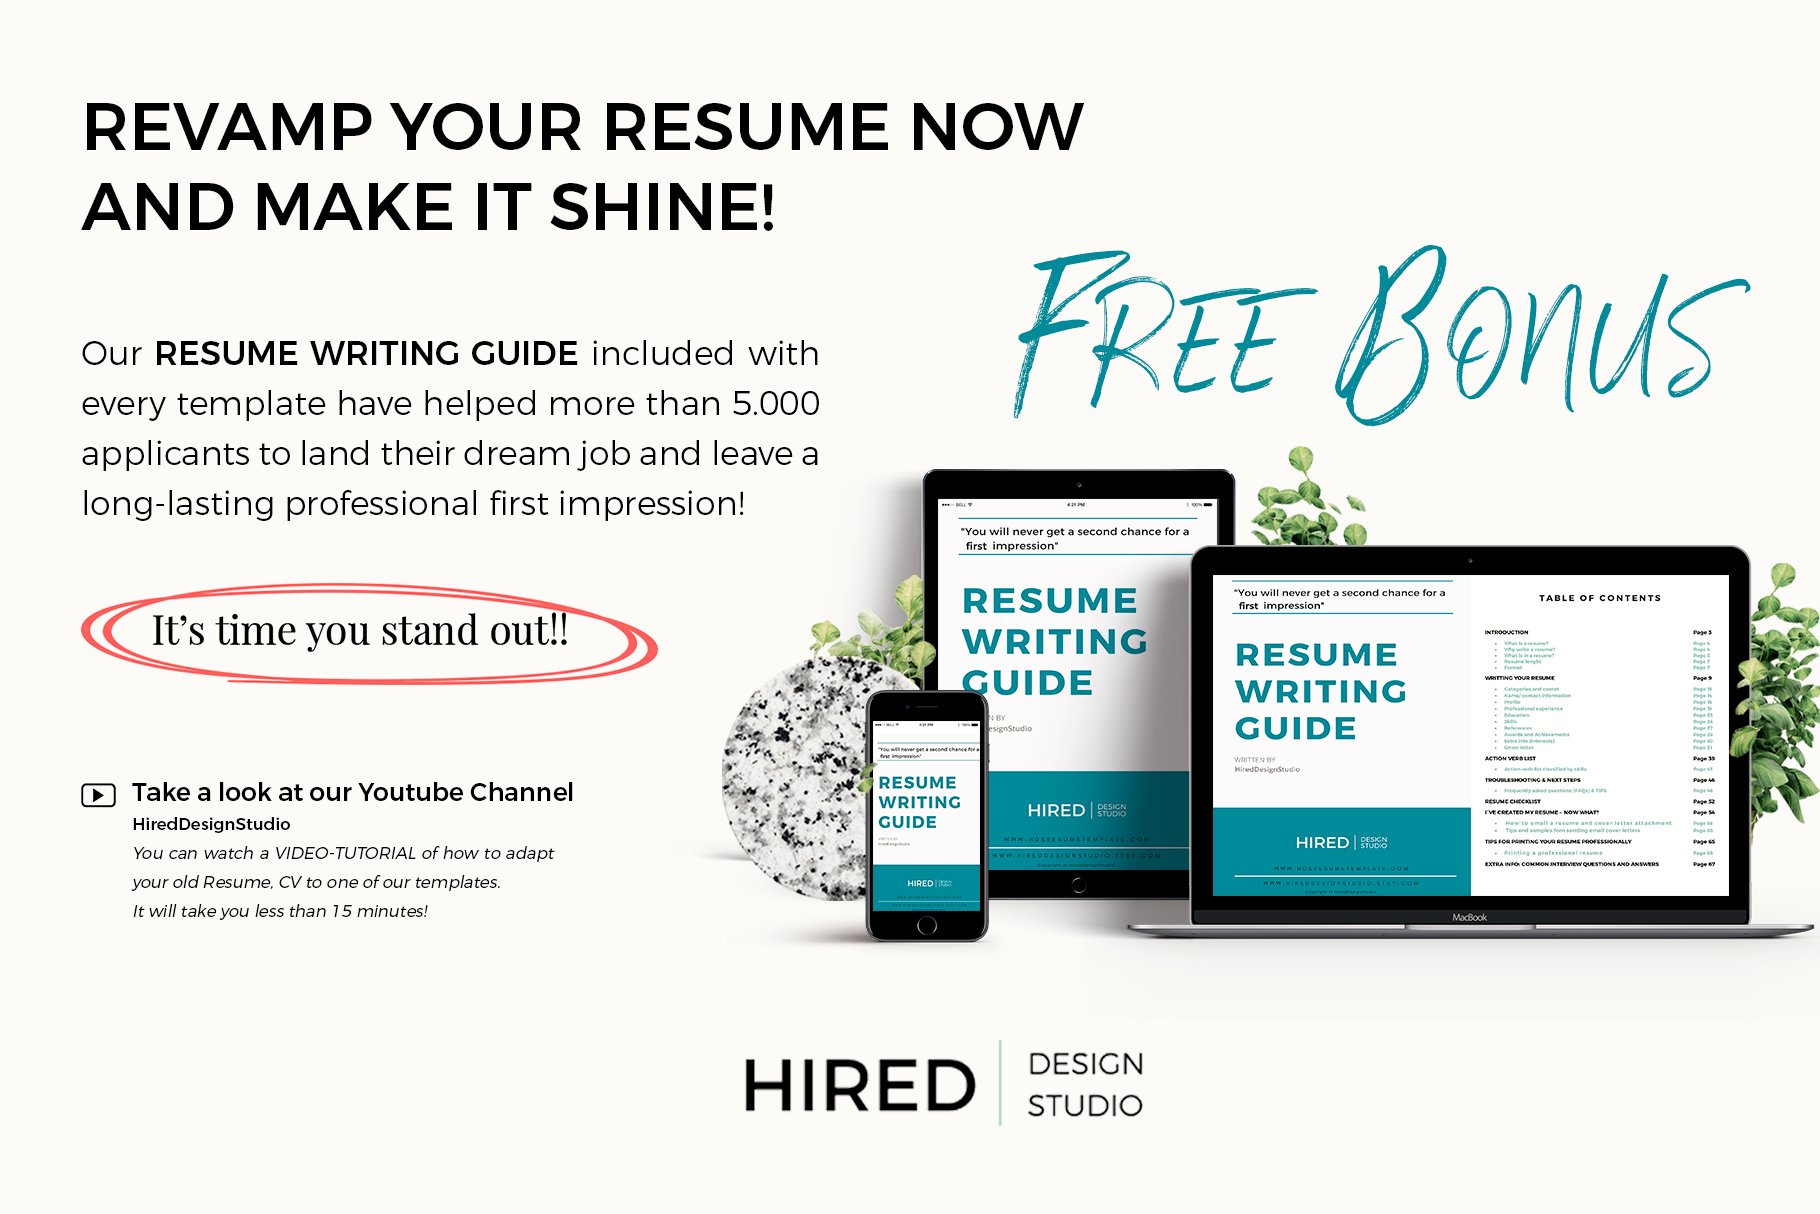 free resume tips customer support career advice resume writing guide 169